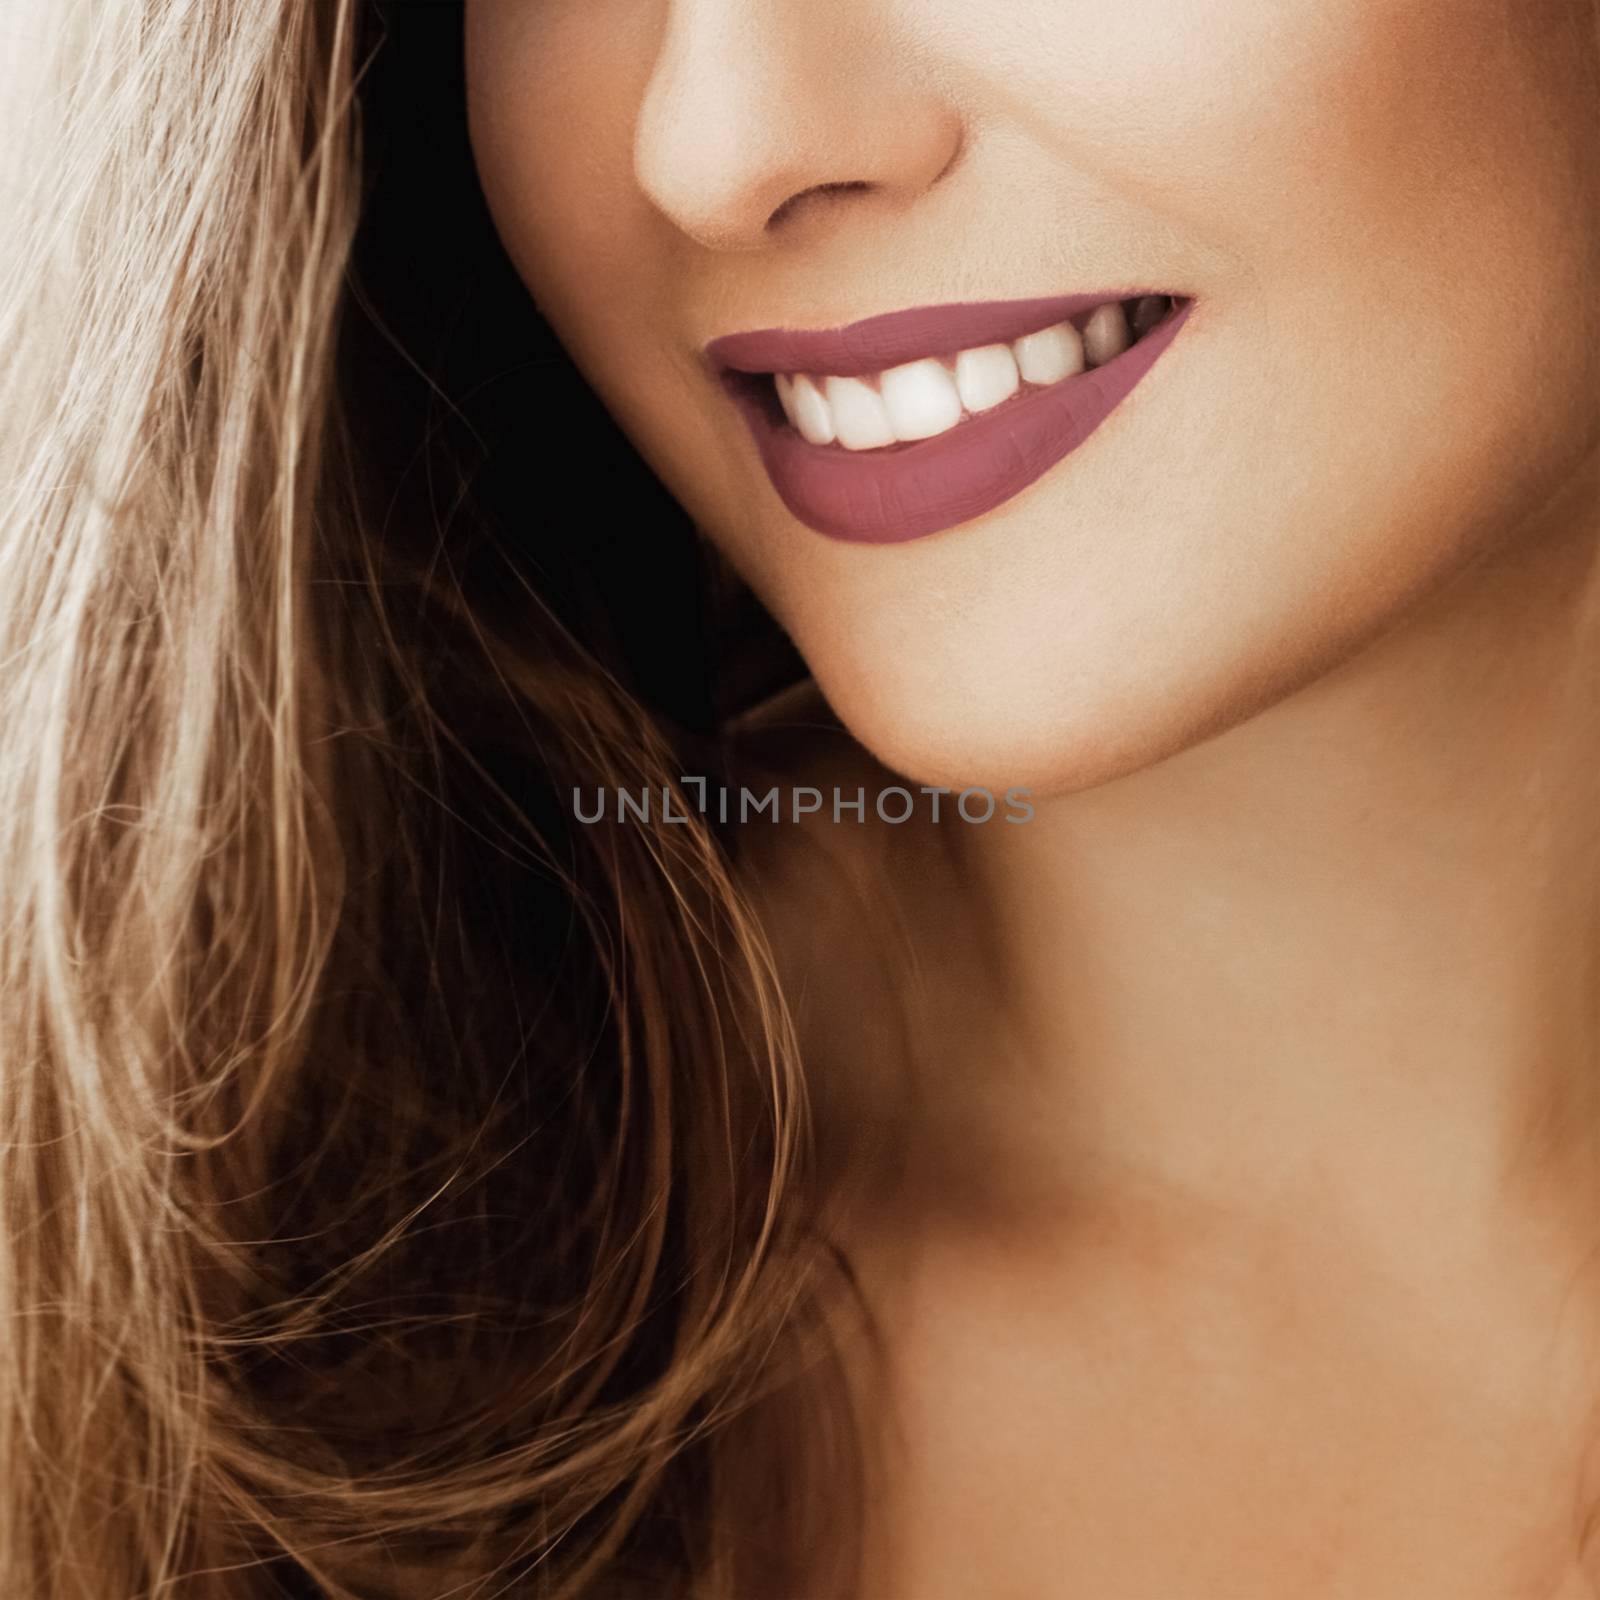 Cheerful healthy female smile with perfect natural white teeth, beauty face closeup of smiling young woman, bright lipstick makeup and clean skin for dental and healthcare brands